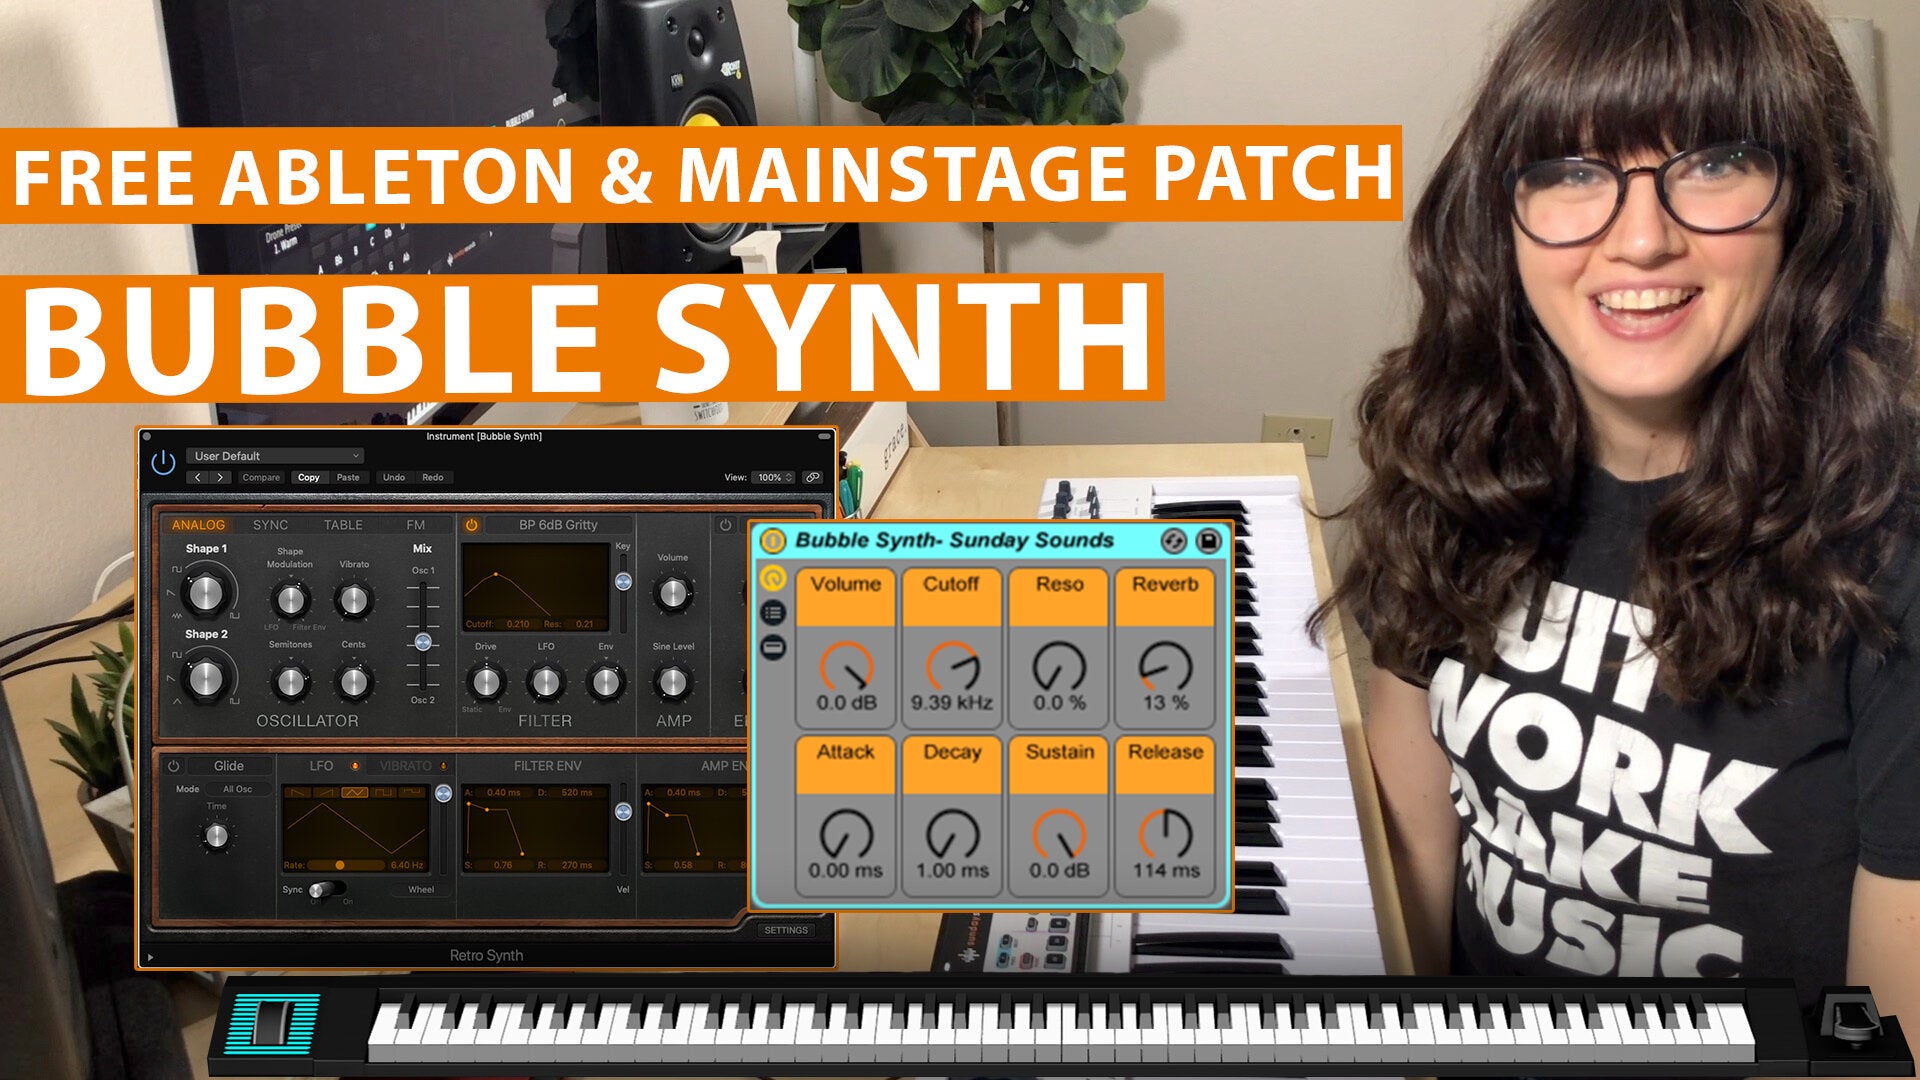 Free MainStage & Ableton Worship Patch! - Bubble Synth